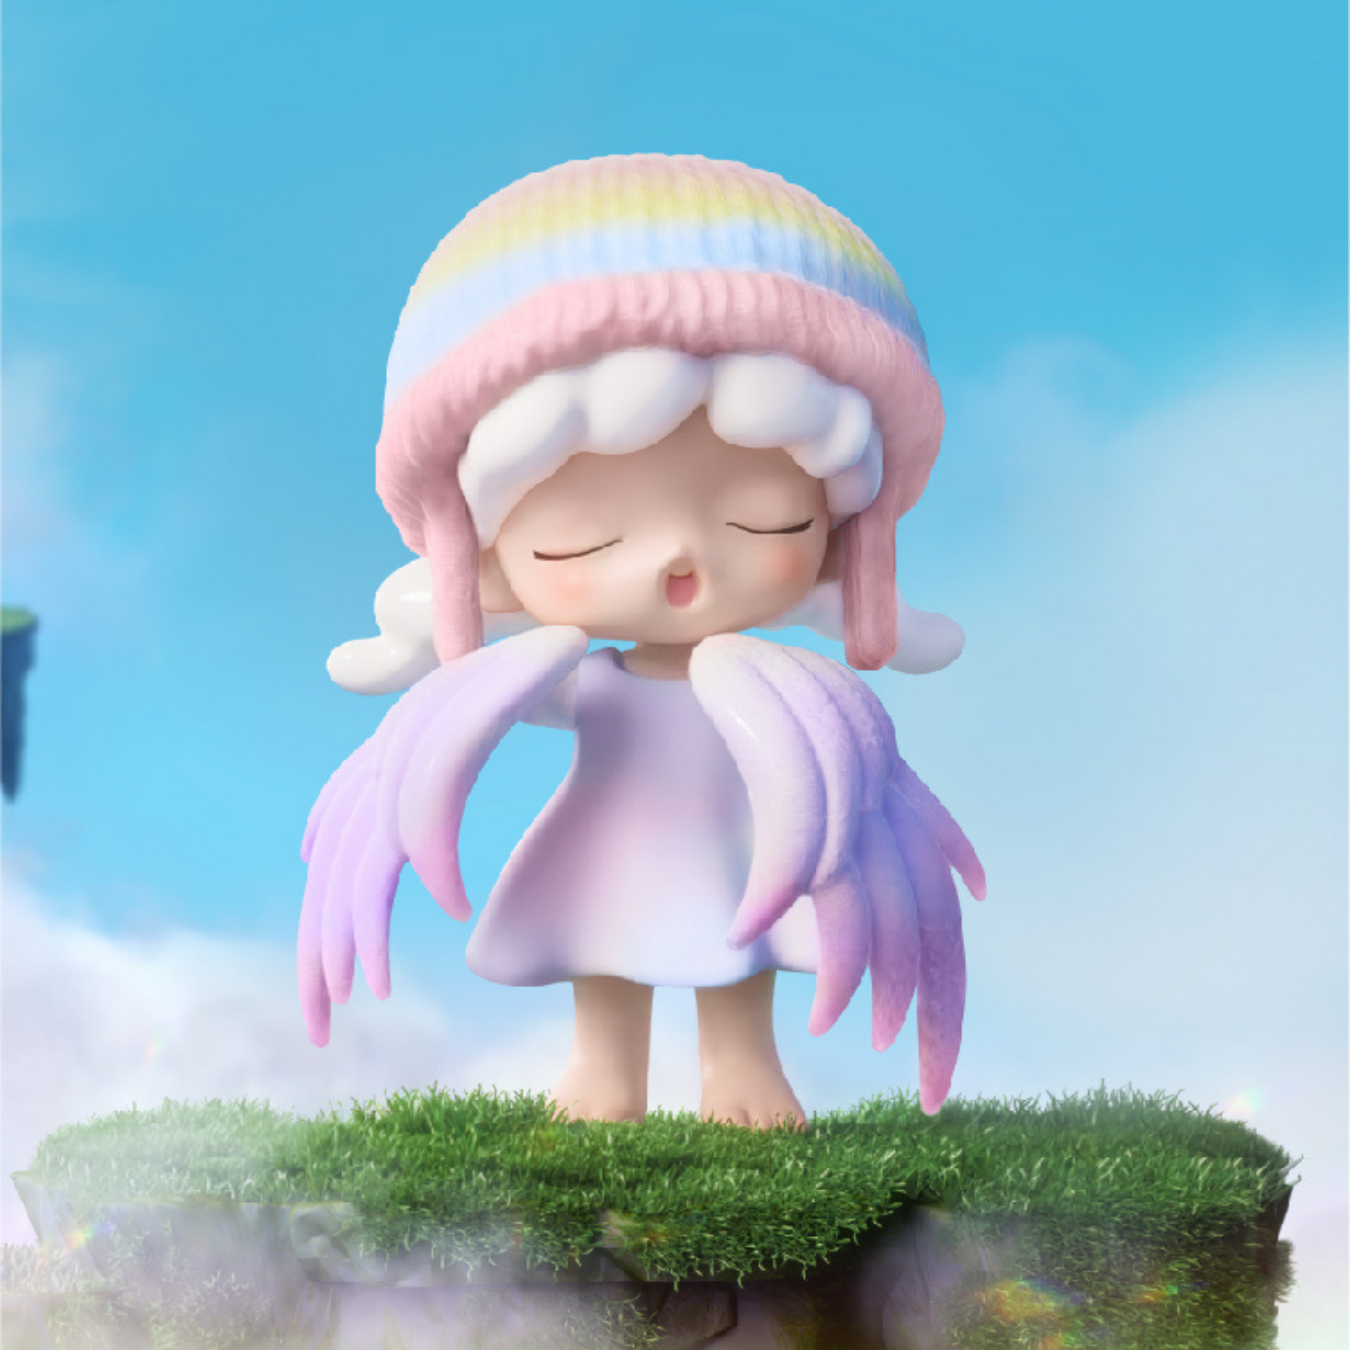 Jotoys: Yumo Castle of the Wind Series Blind Box Figure